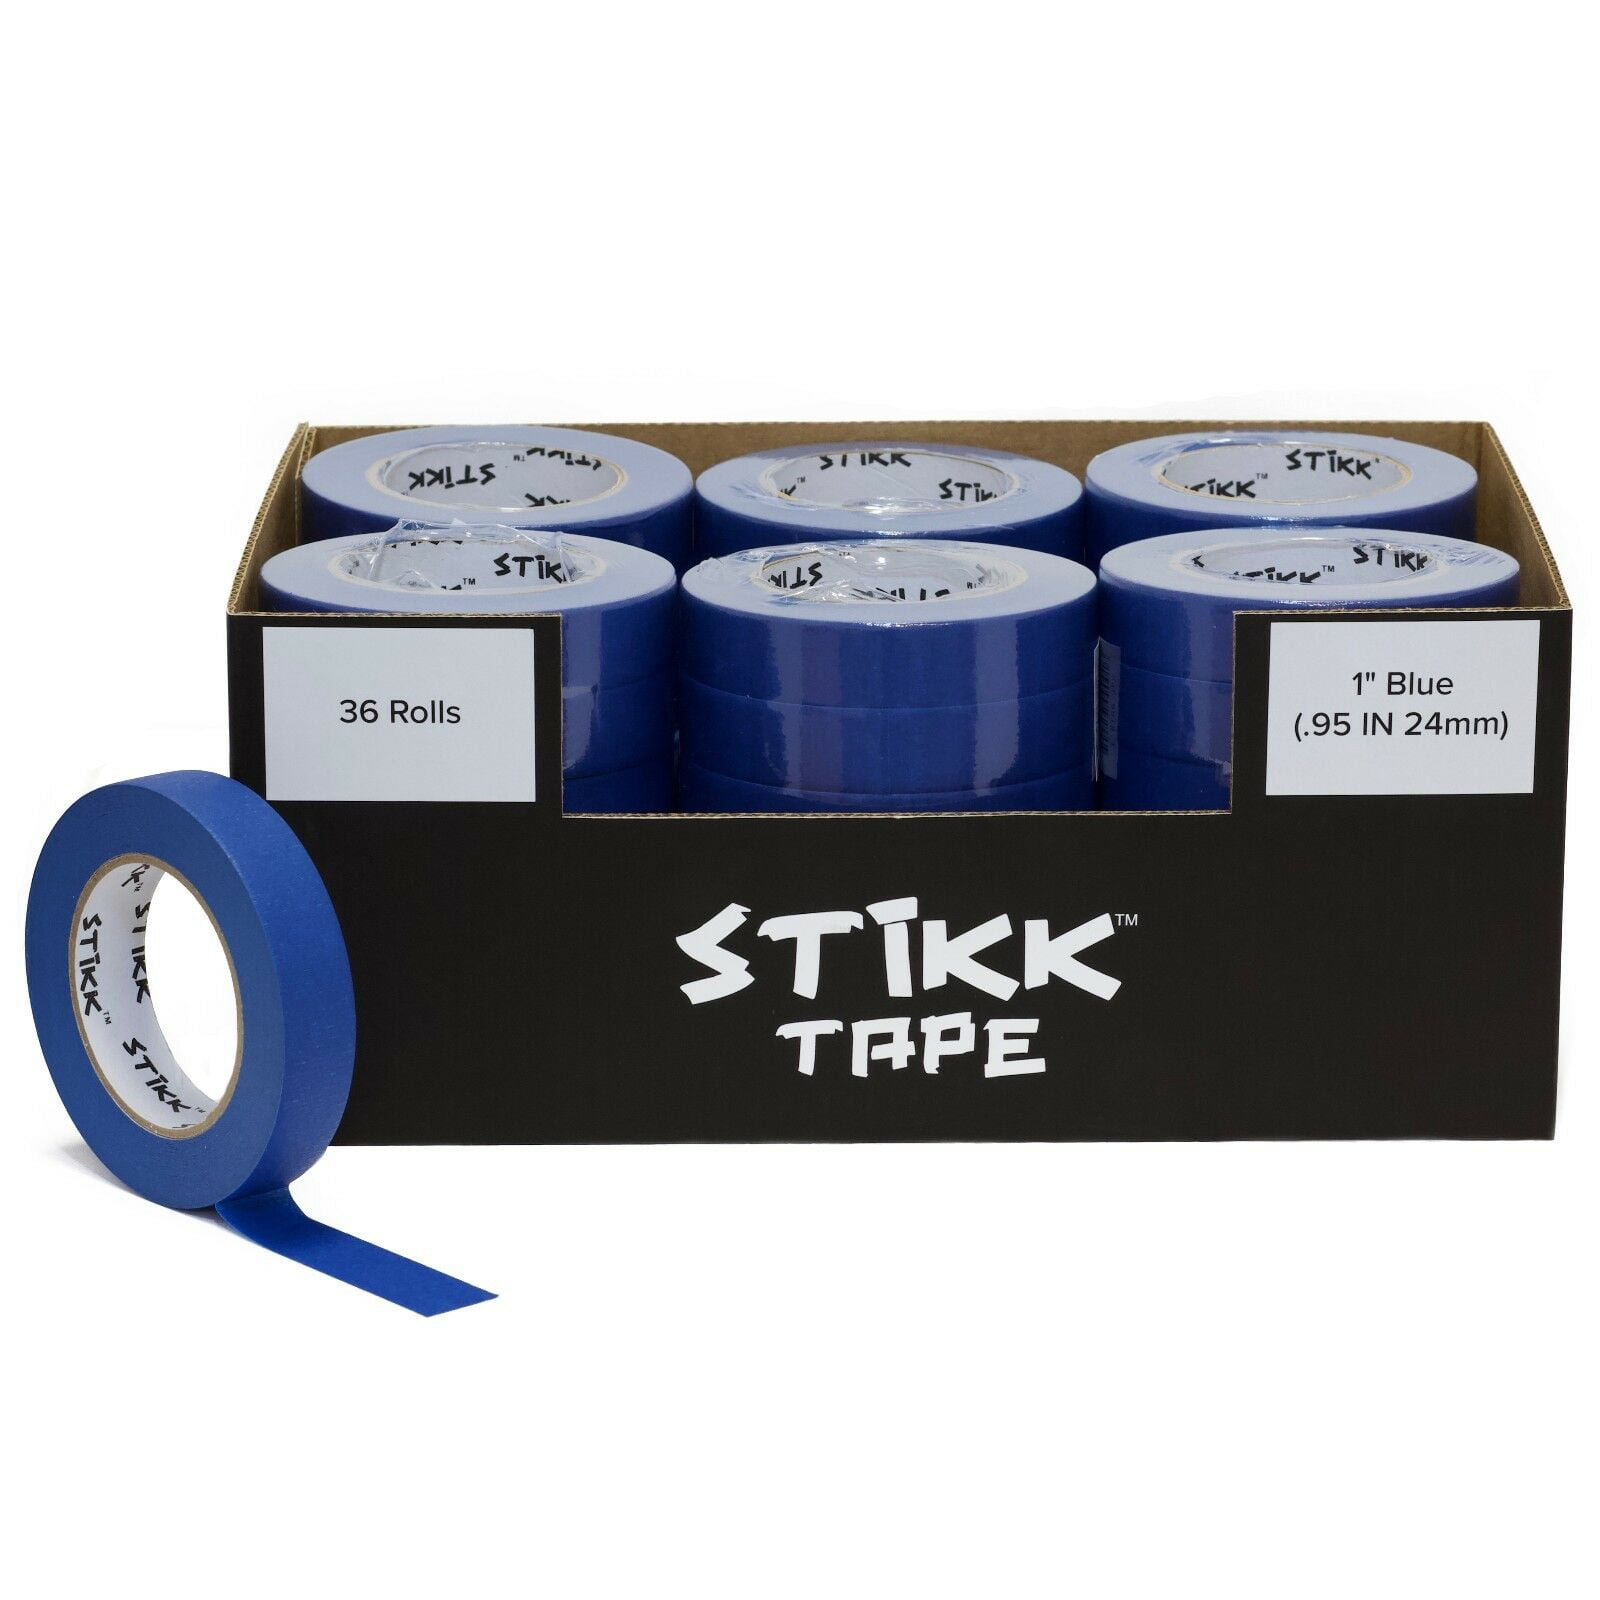 Painters Masking Blue Tape - 1 x 60 Yards (24mm x 55m) – MEITE USA